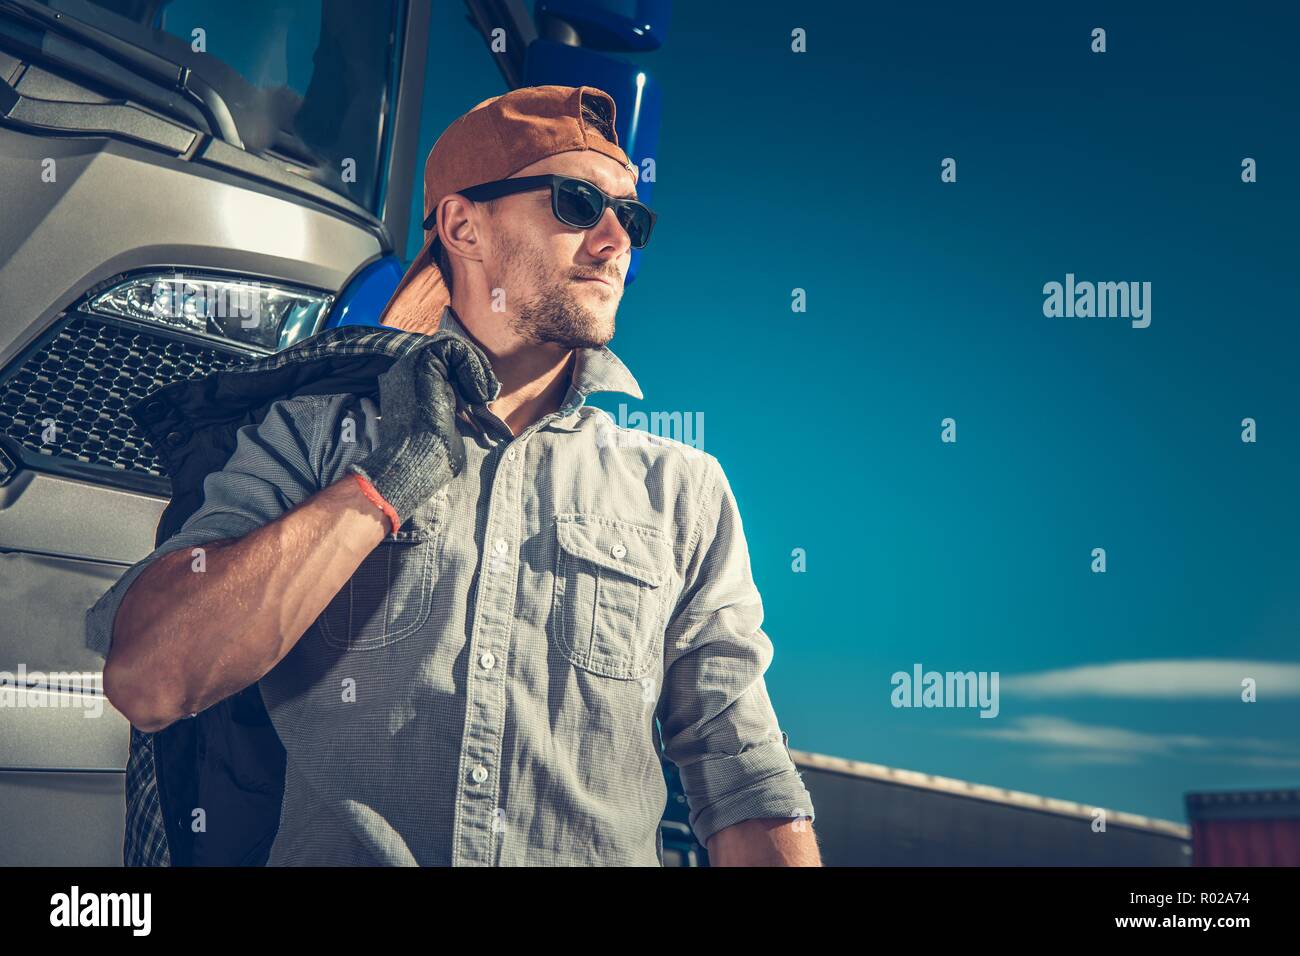 Relaxed Caucasian Truck Driver Wearing Baseball Hat and Sunglasses. Semi Truck in the Background. Stock Photo